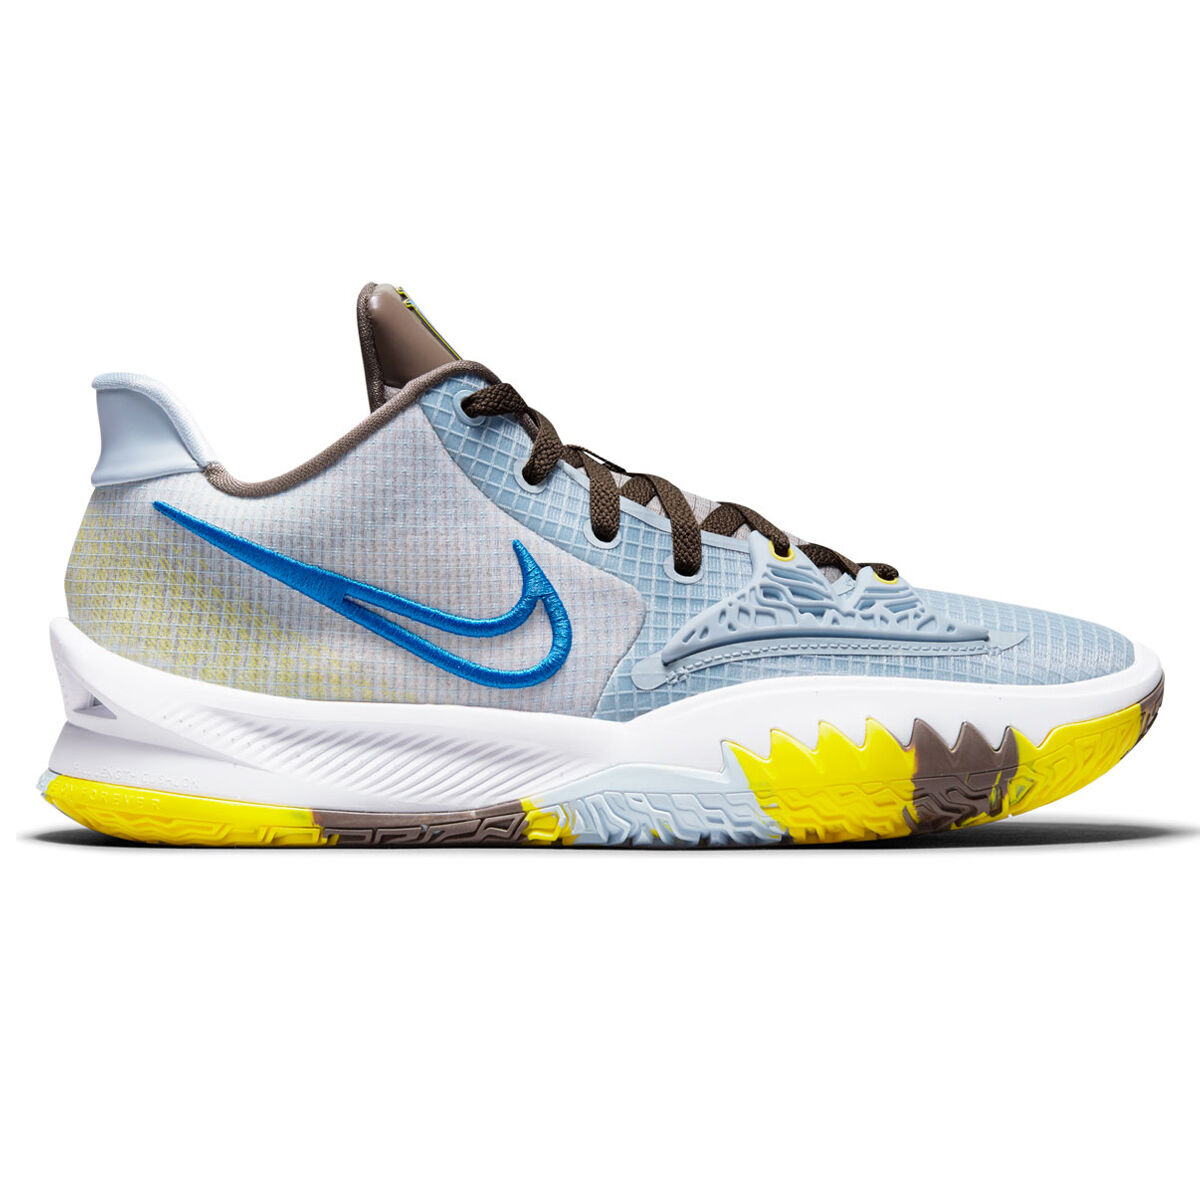 kyrie volleyball shoes